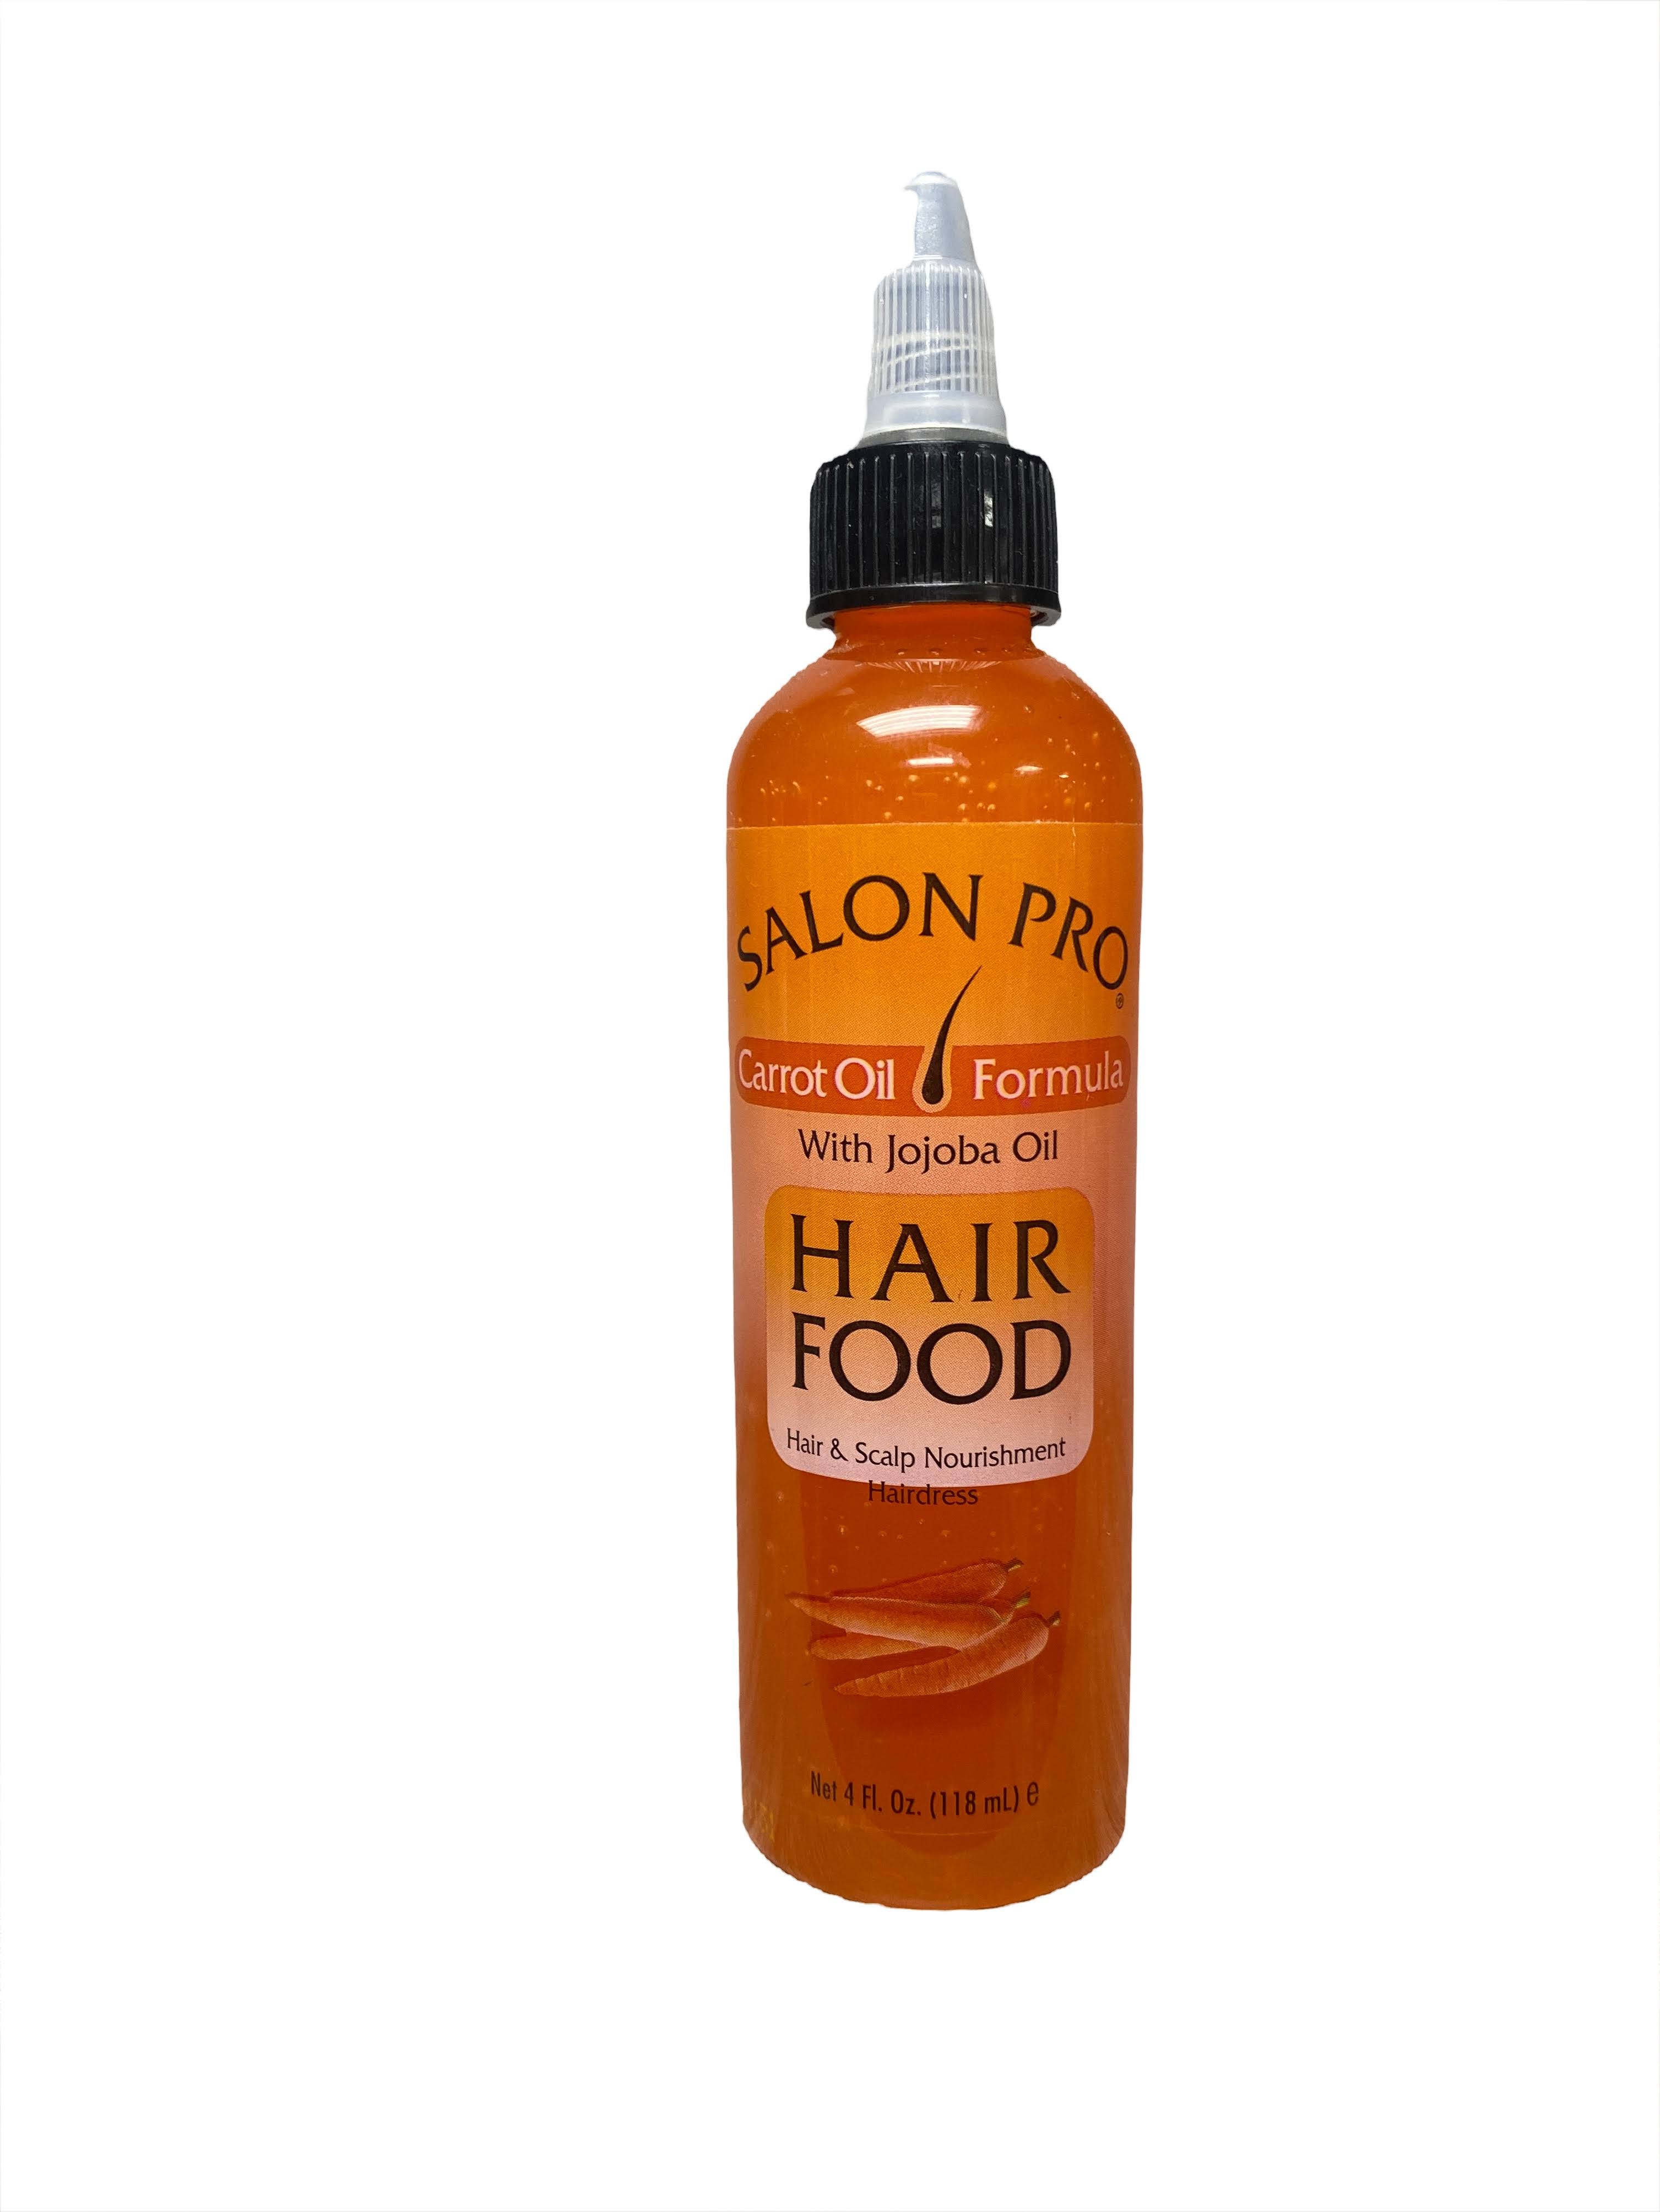 Salon Pro: Carrot Oil Hair Food for Healthy and Radiant Hair | Image